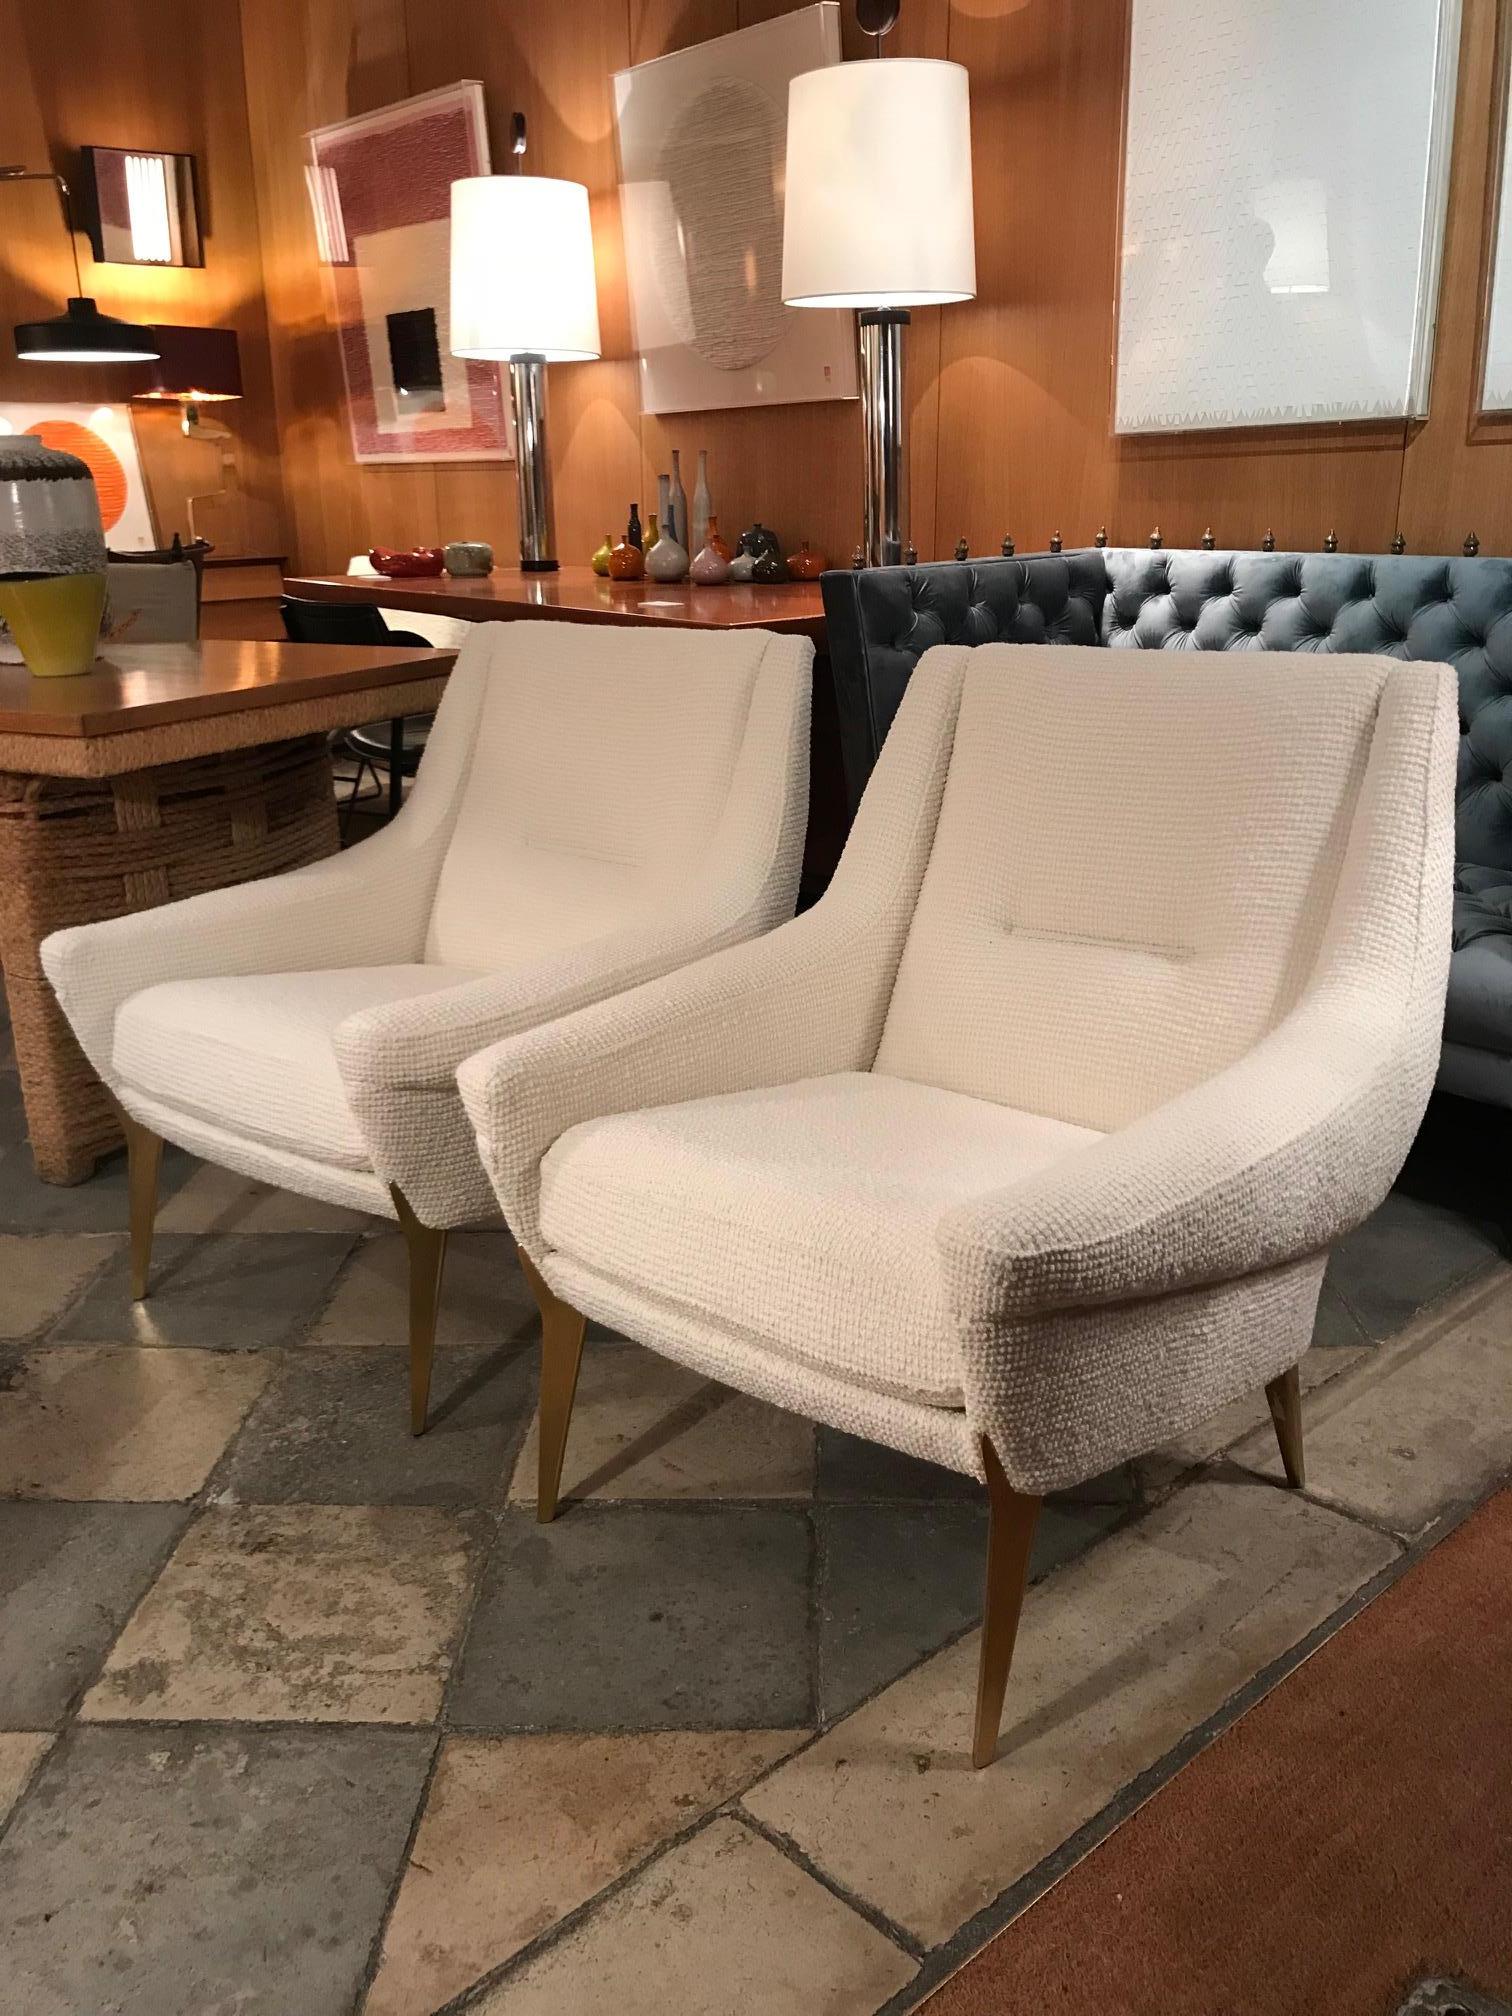 Pair of armchairs with anodized cast aluminium legs designed by Charles Ramos, recently reupholstered with a white Bisson Bruneel fabric.